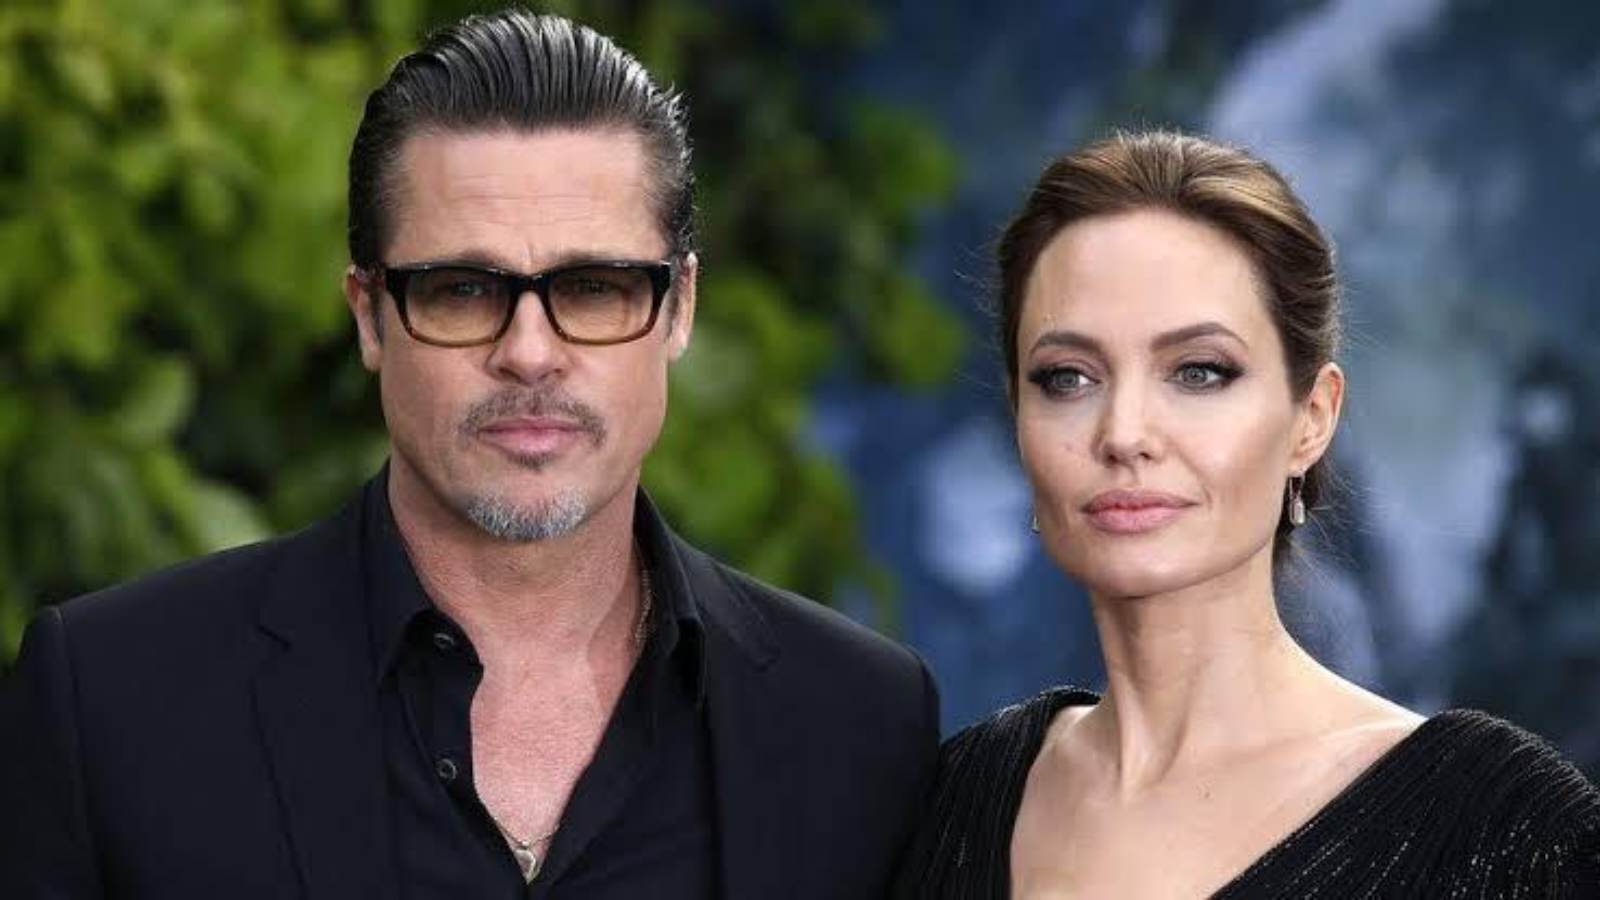 Brad Pitt hires personal investigators to forward the case against her ex wife